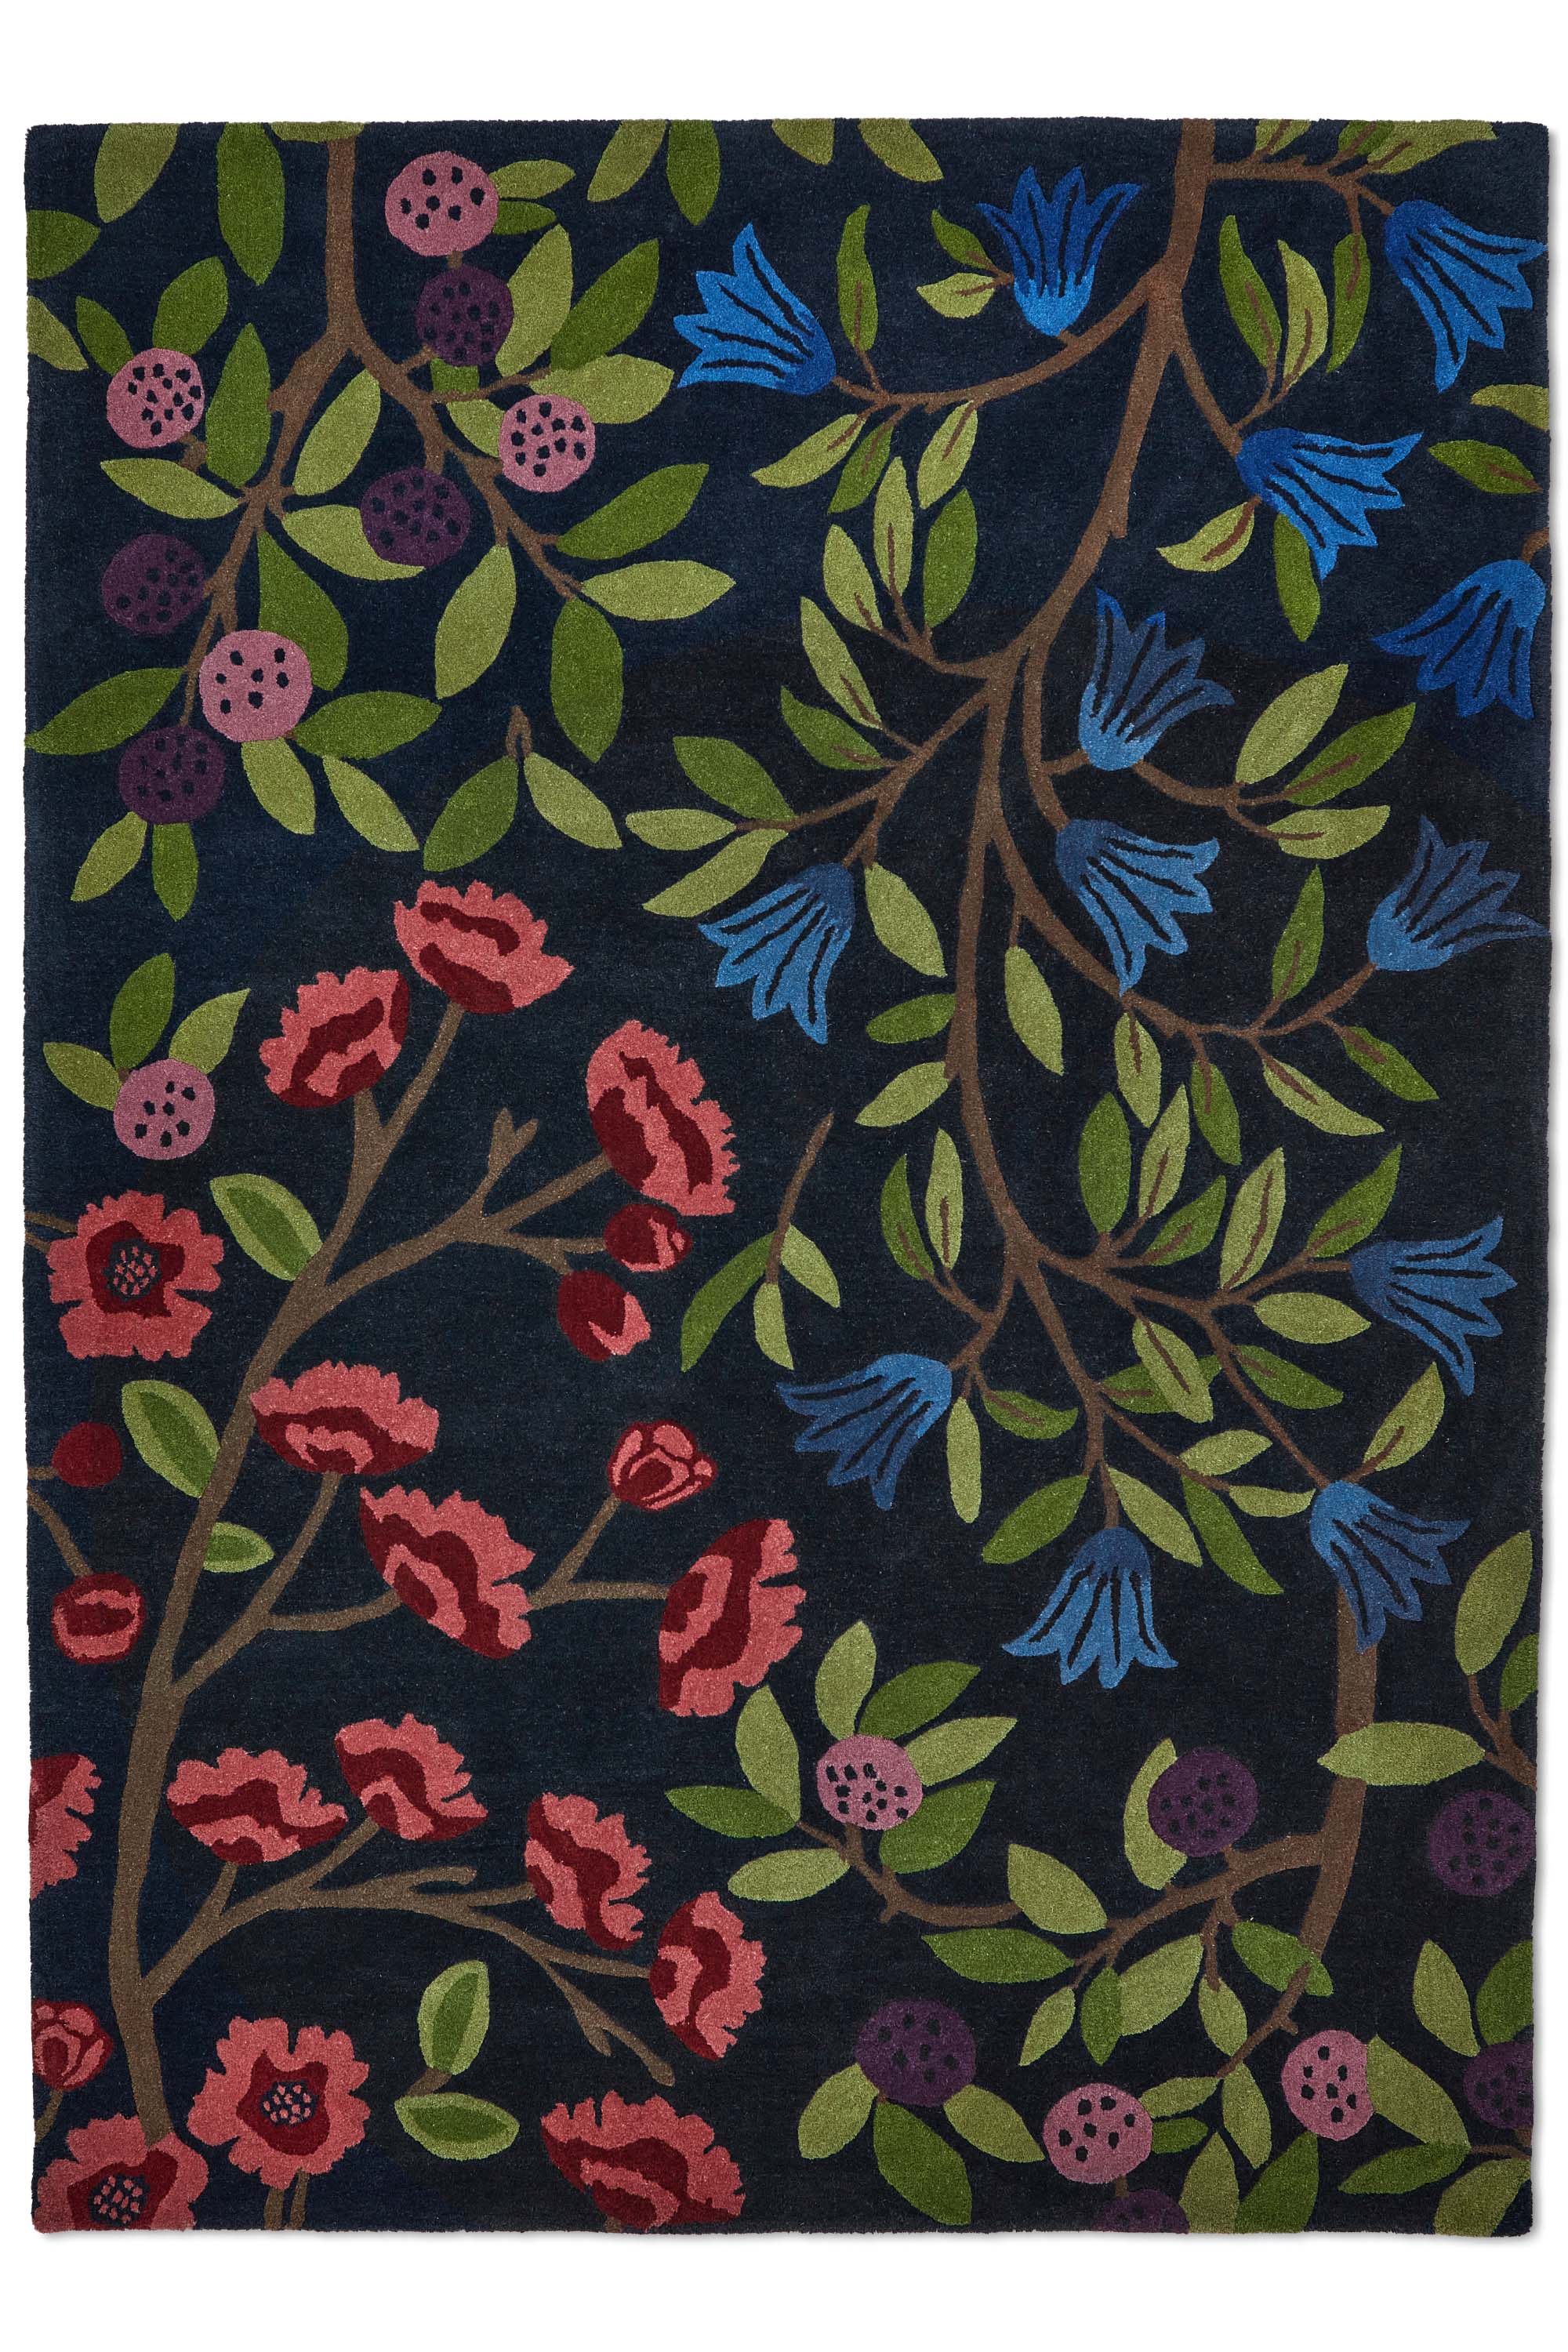 Modern rug with floral pattern in blue and natural tones